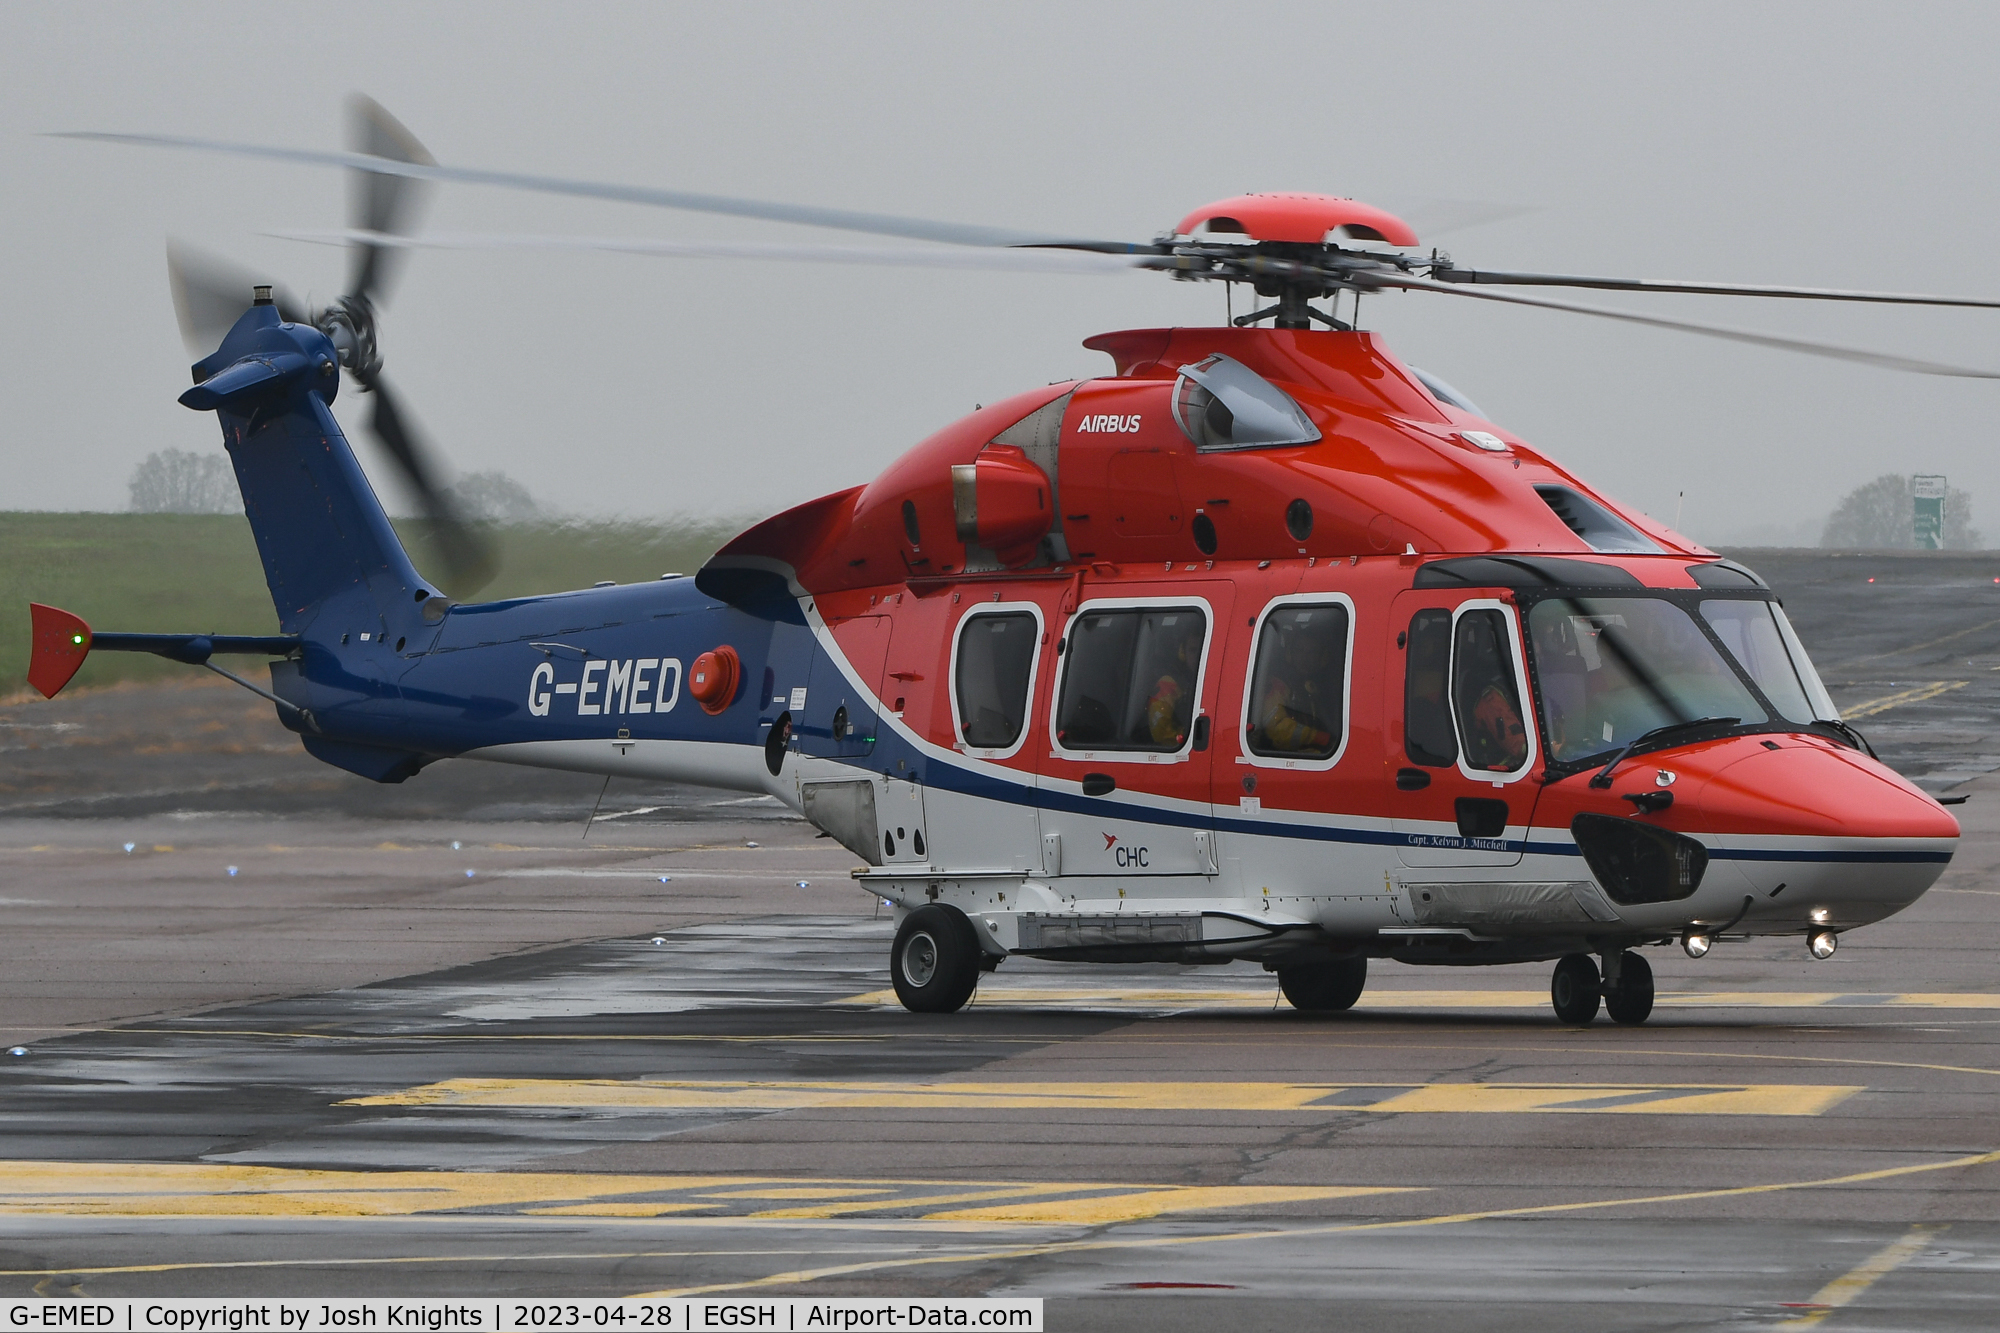 G-EMED, 2019 Airbus Helicopters EC-175B C/N 5039, Departing to The Dogger Bank Windfarm on the first Service provided by CHC.